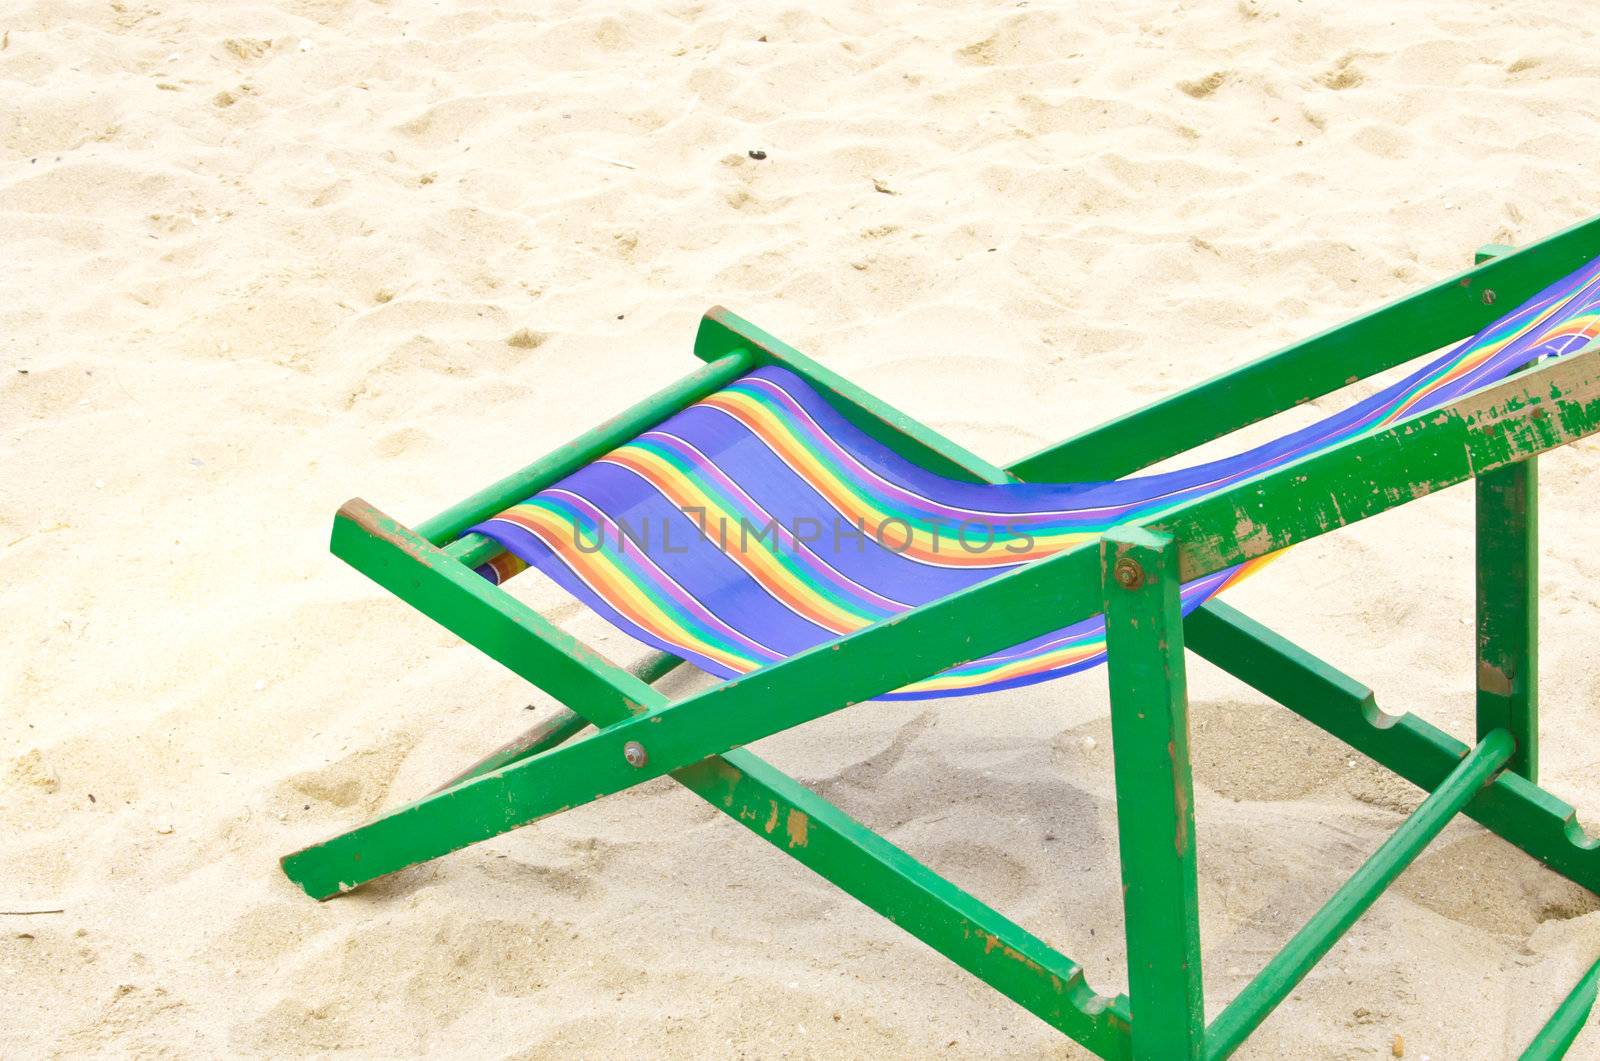 Folding chair  at the beach of the sea.